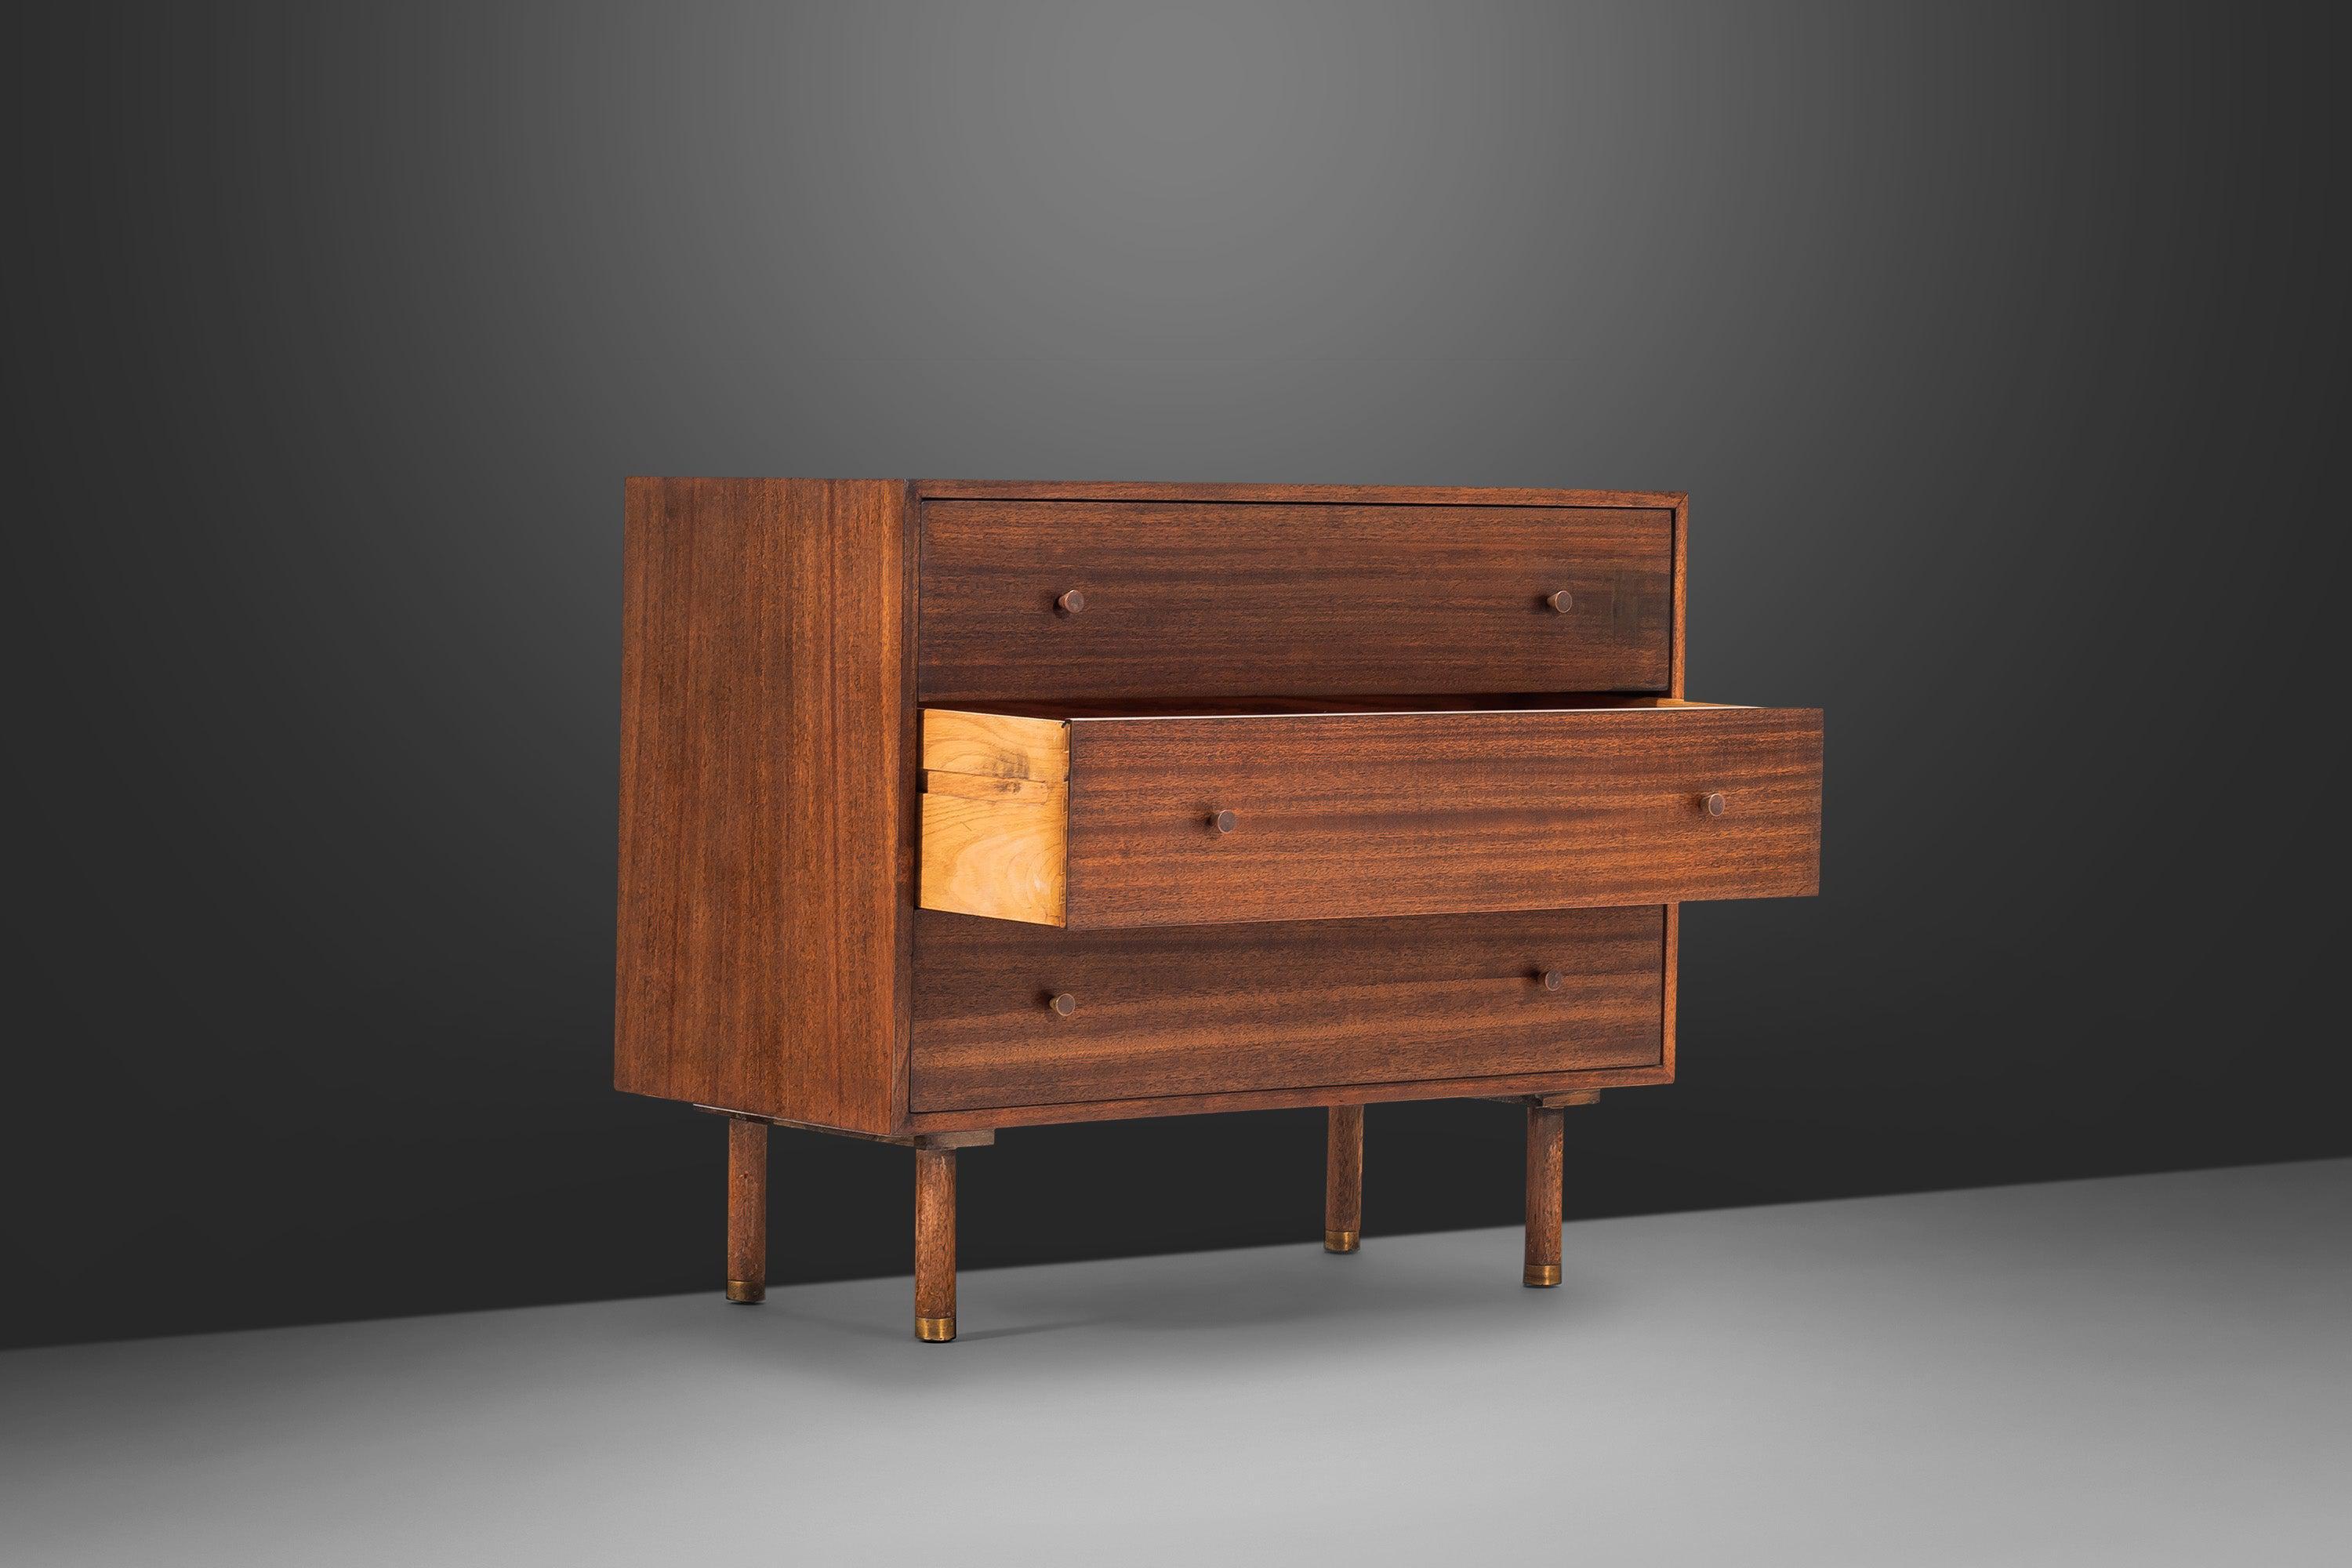 American Rare Mid-Century Modern Three-Drawer Dresser in Mahogany by Harvey Probber, USA For Sale